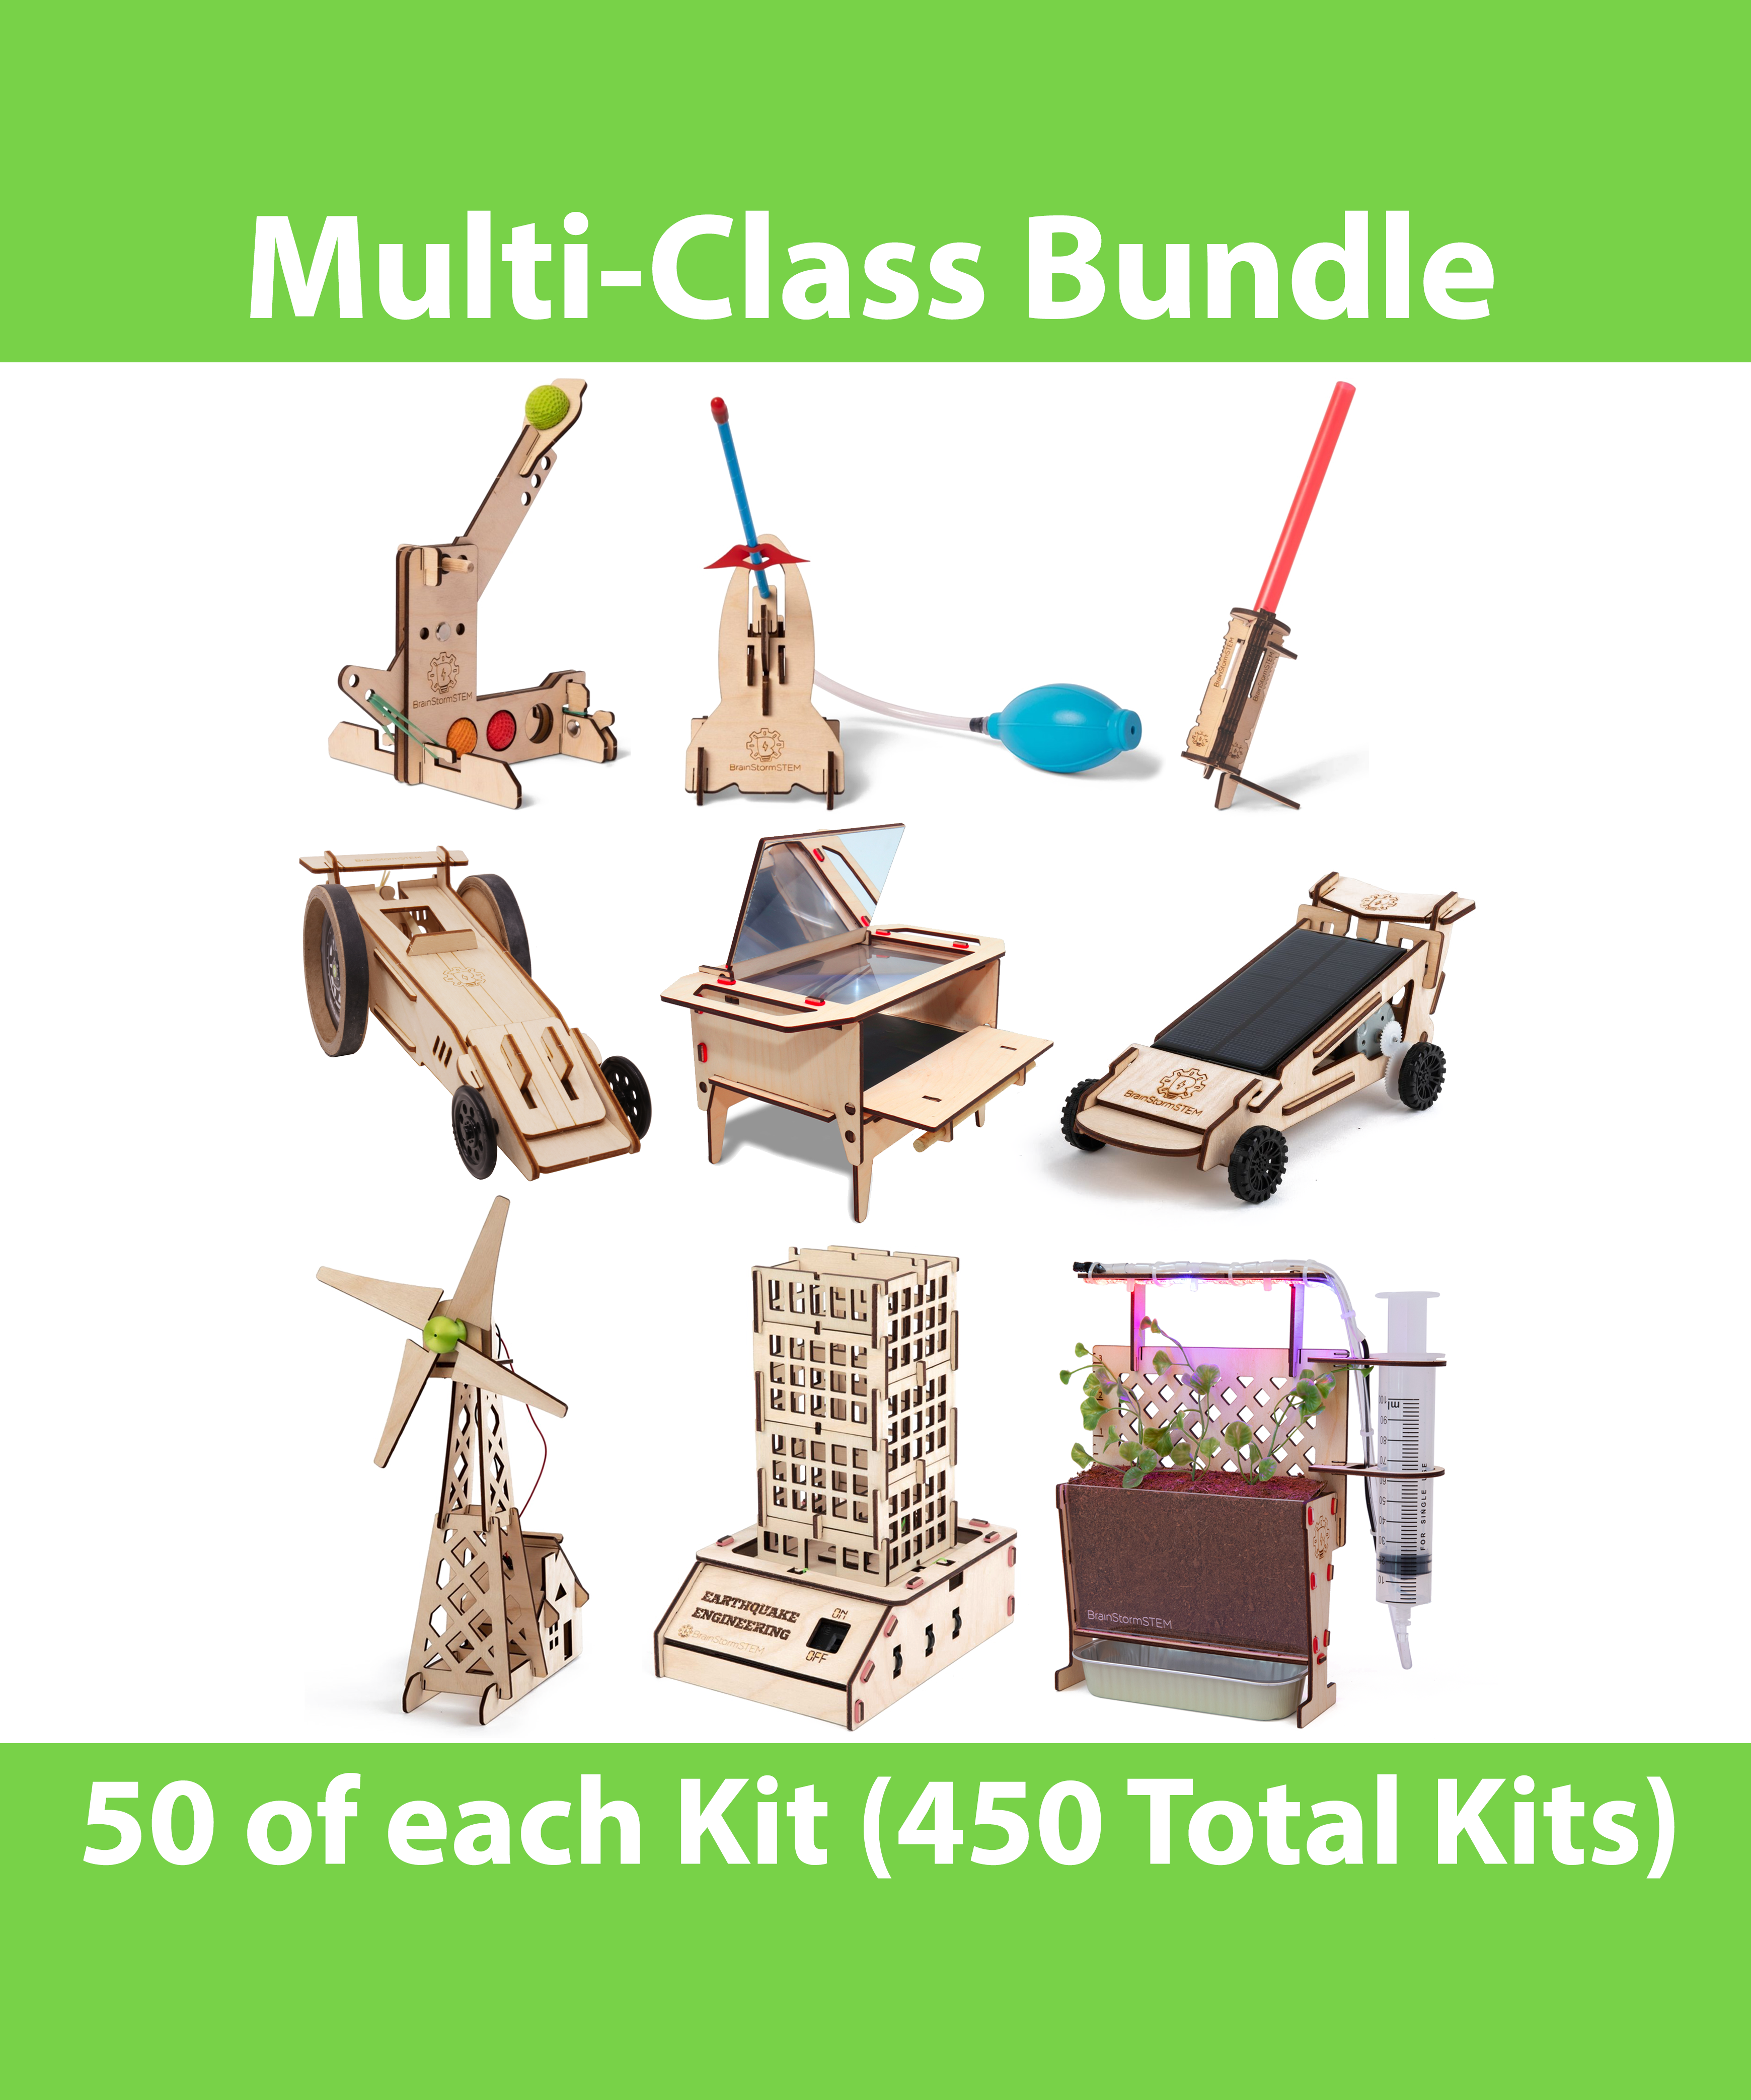 Multi-Class Complete Bundle - STEM Variety Kit [50 of each Kit for 450 total Kits]